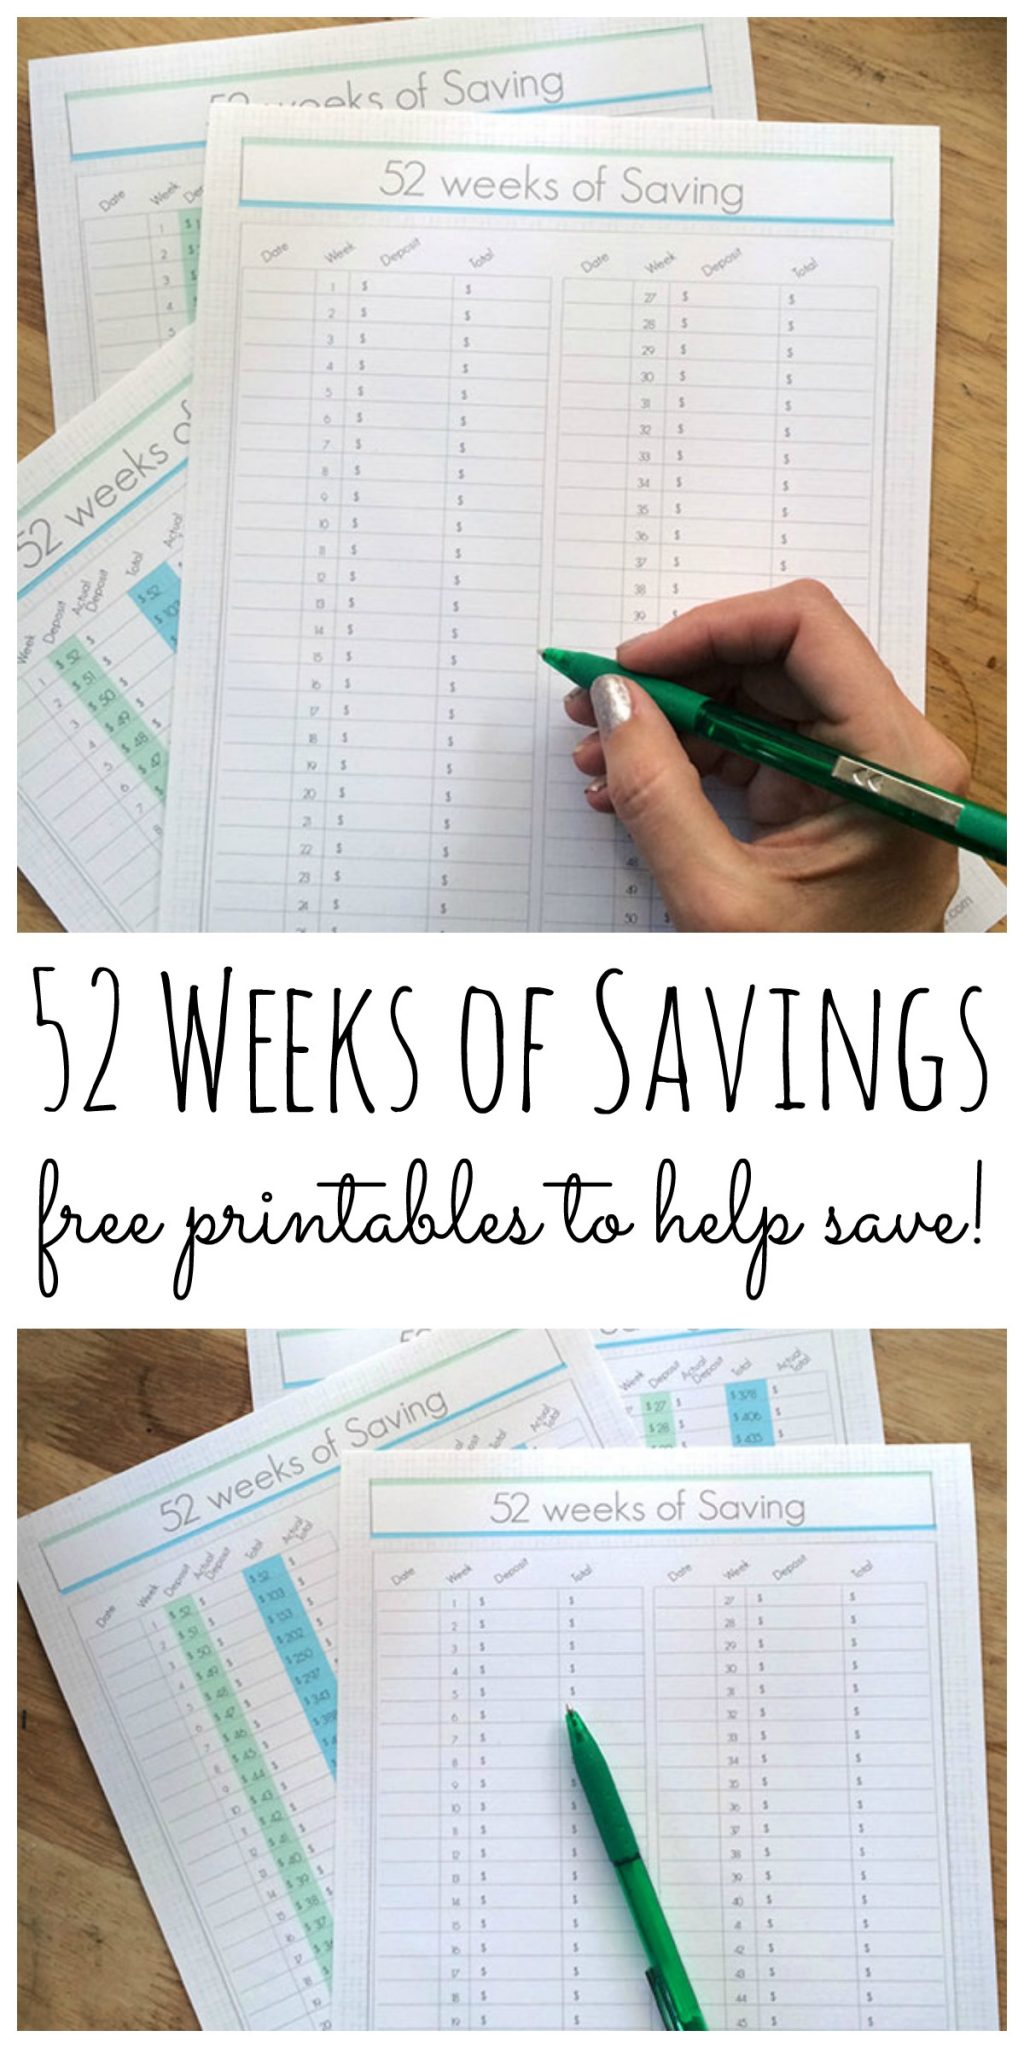 Print these 52 weeks of savings printables for an easy way to start saving money in the new year!